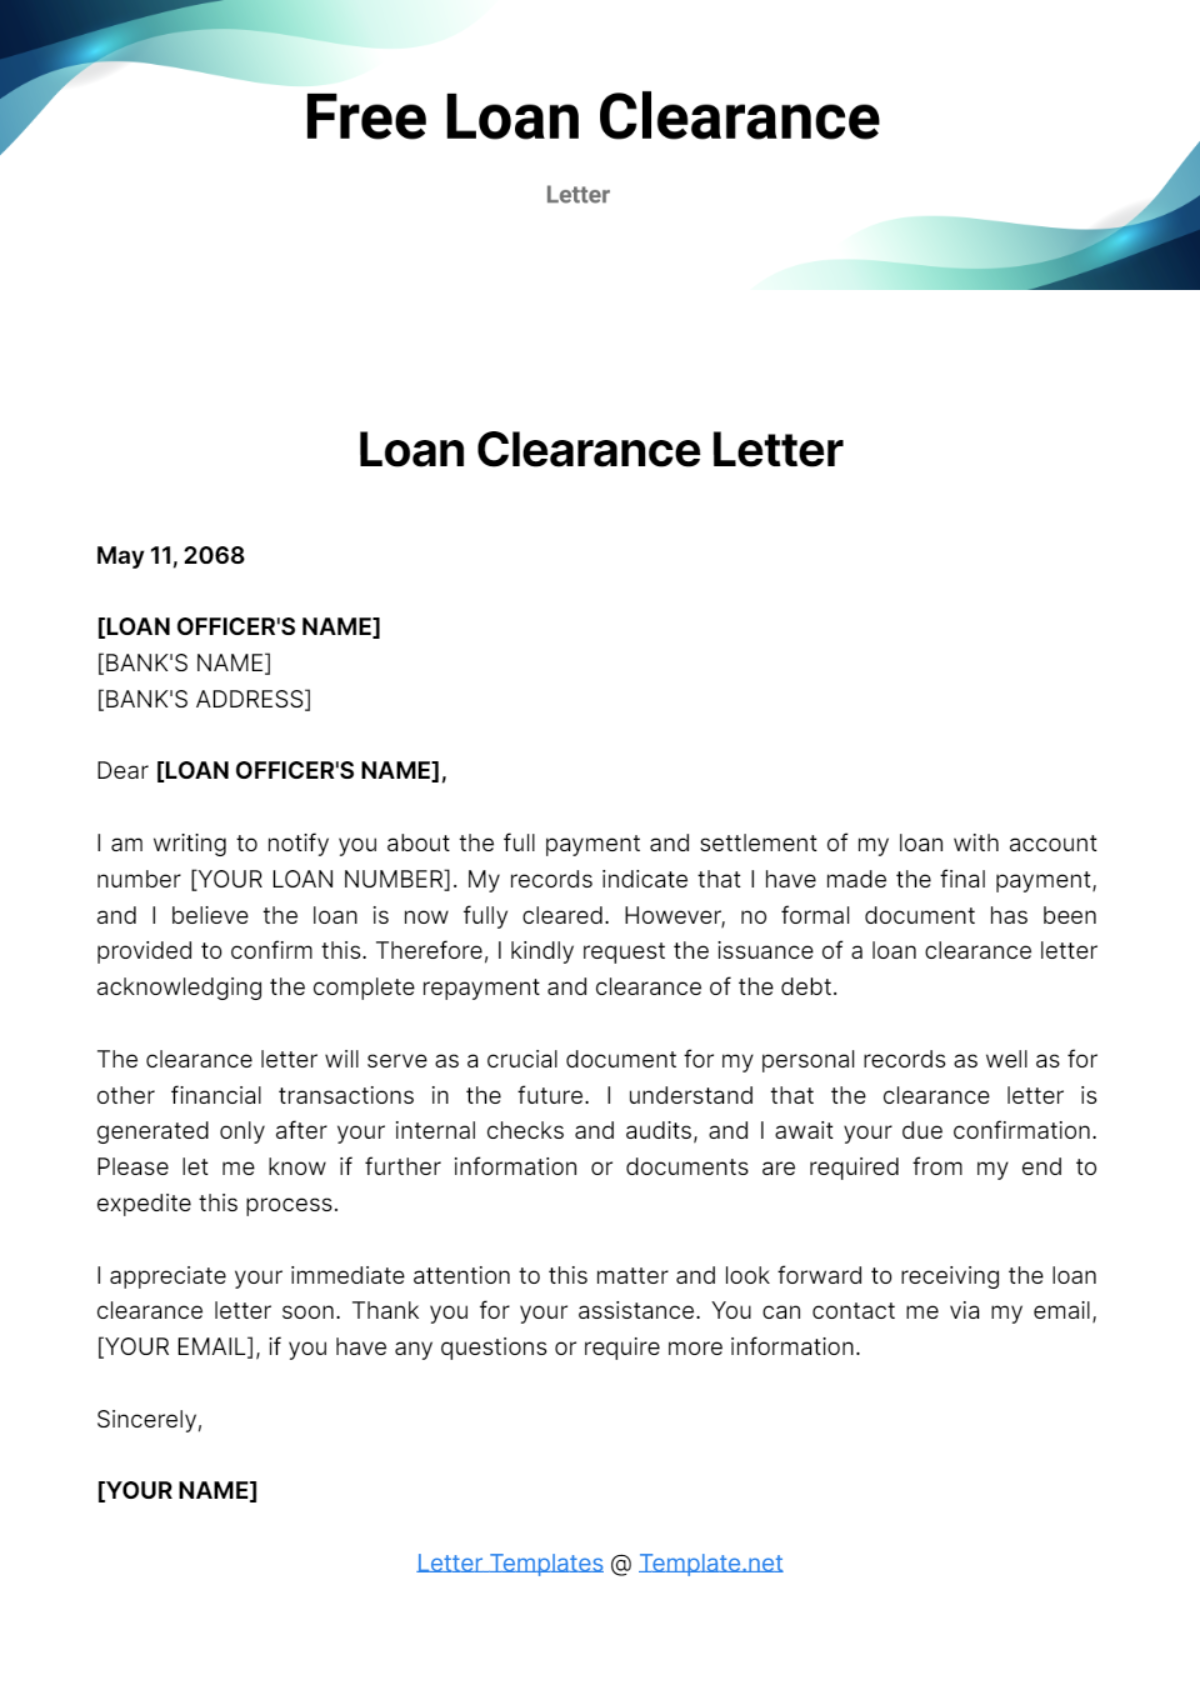 Free Loan Clearance Letter Template